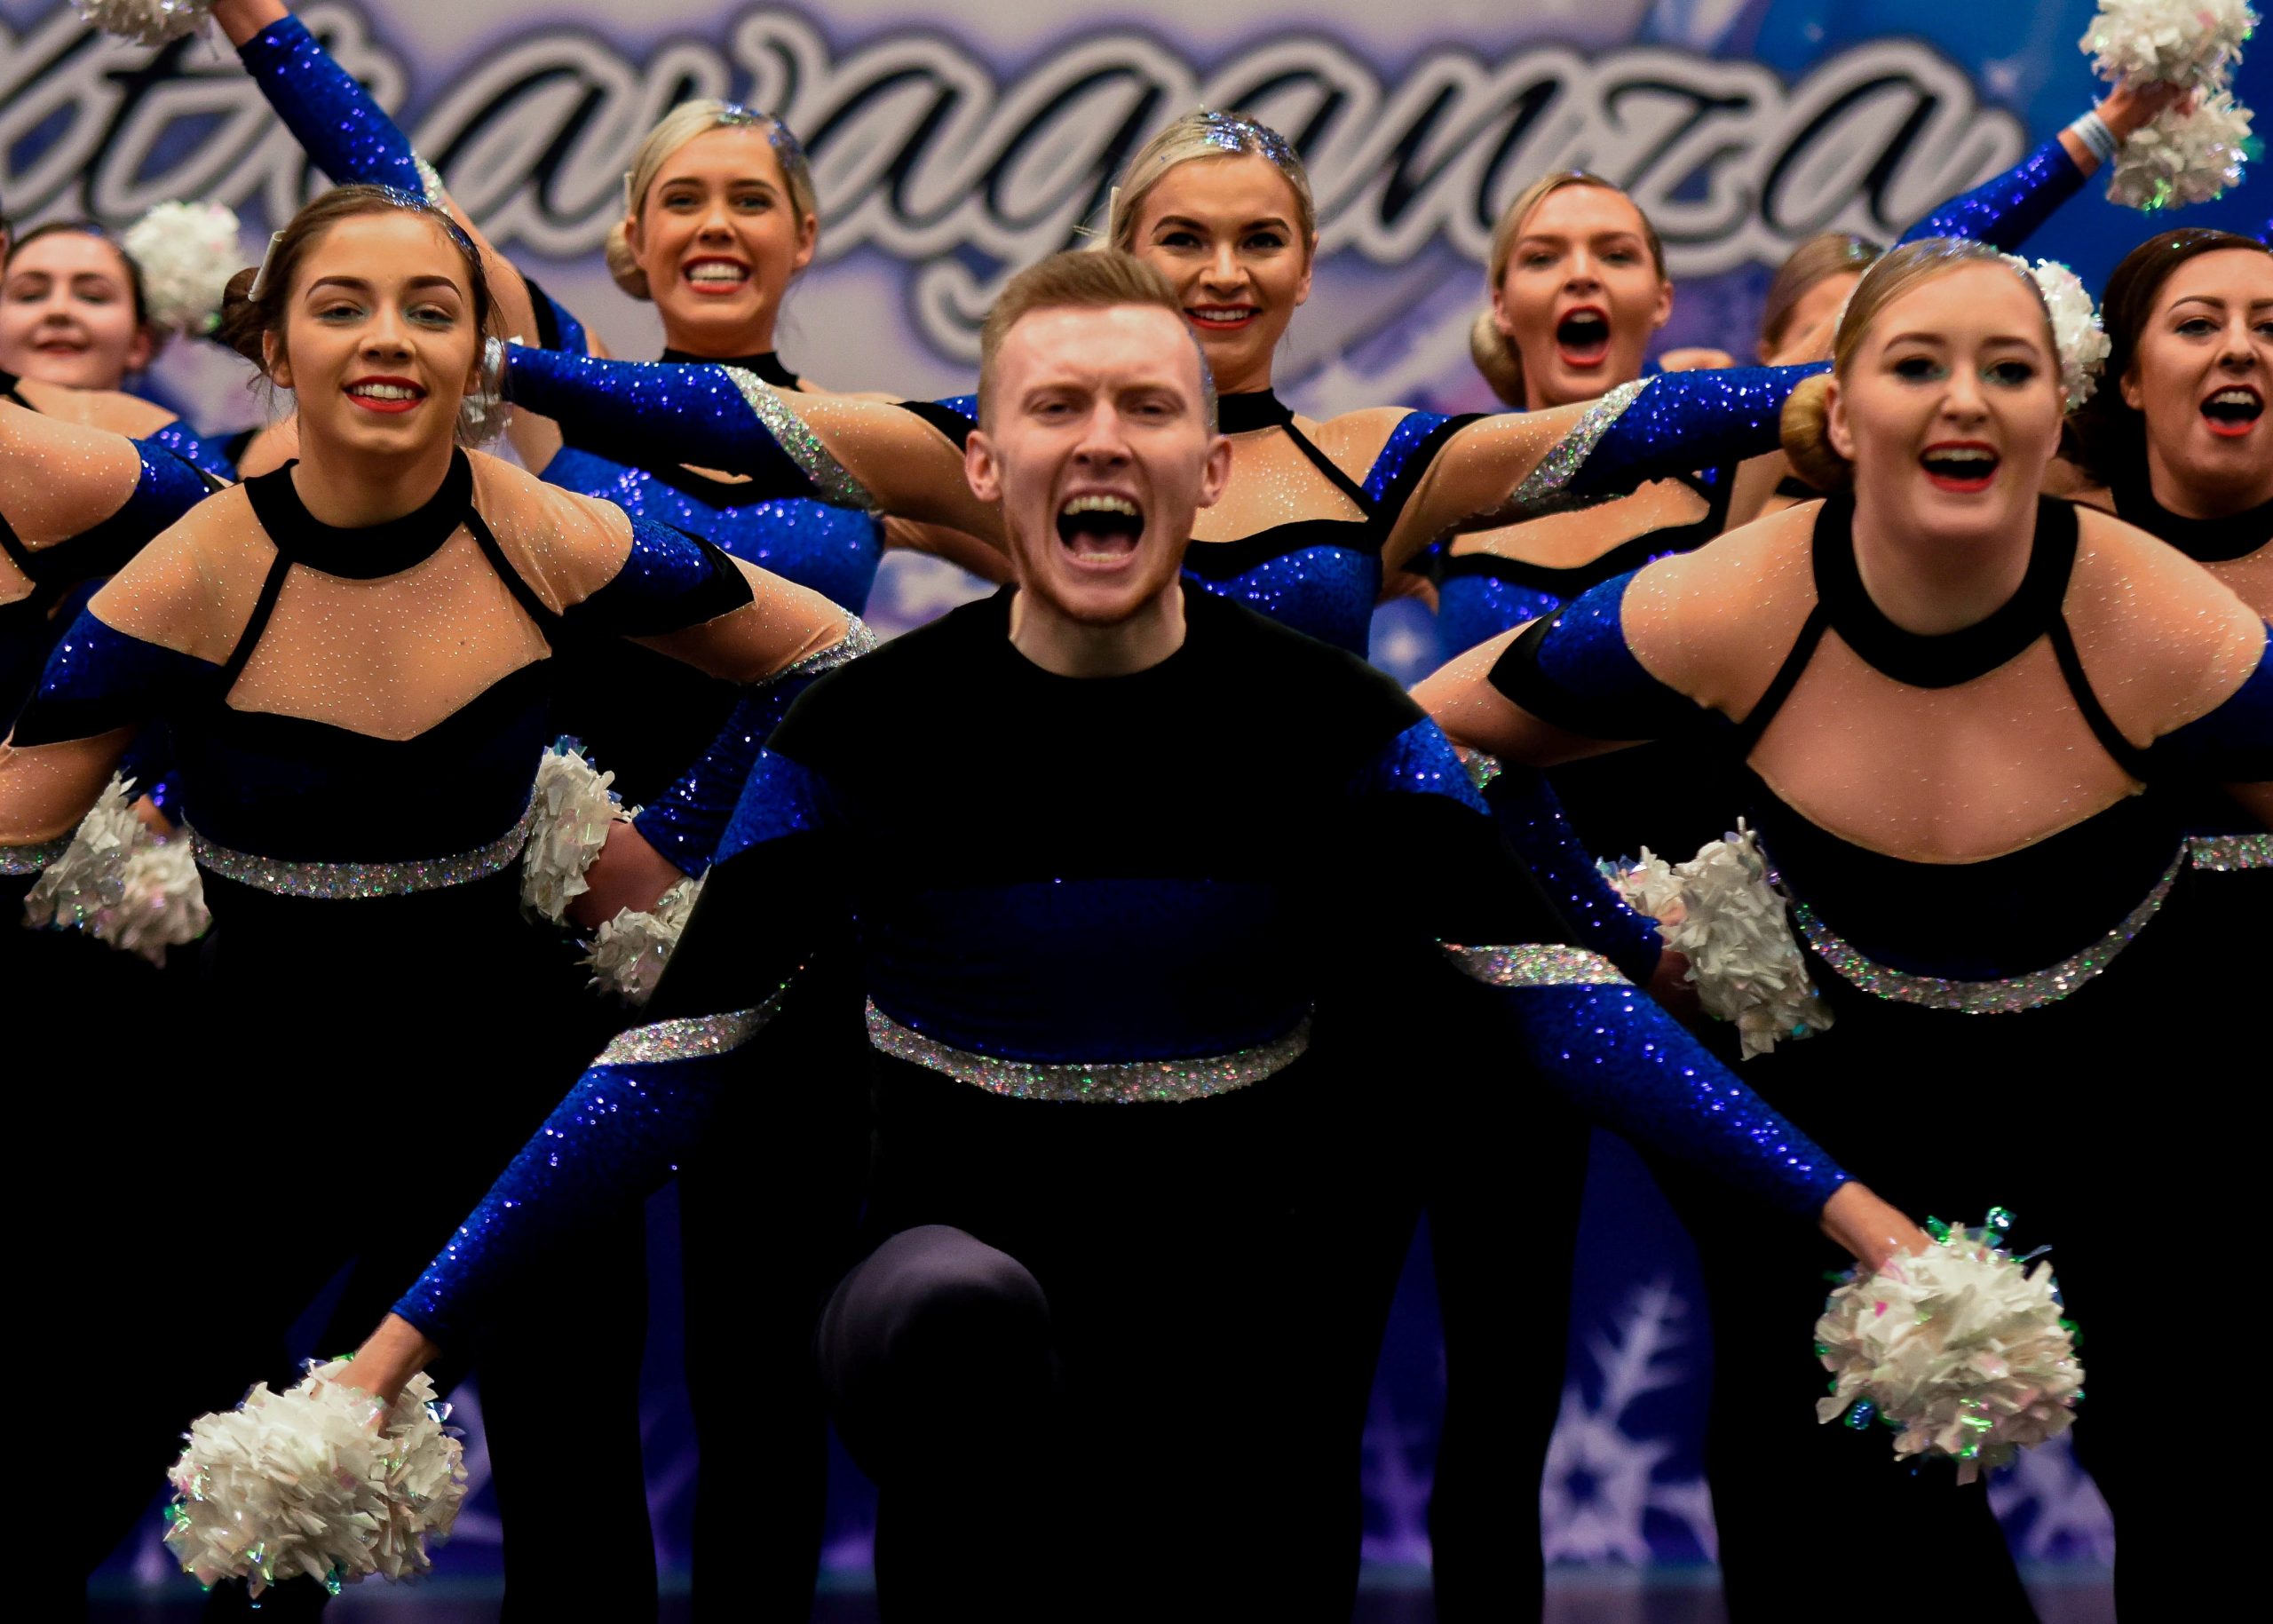 Ice Incredibly Cool Events Uk Cheer Dance Competitions